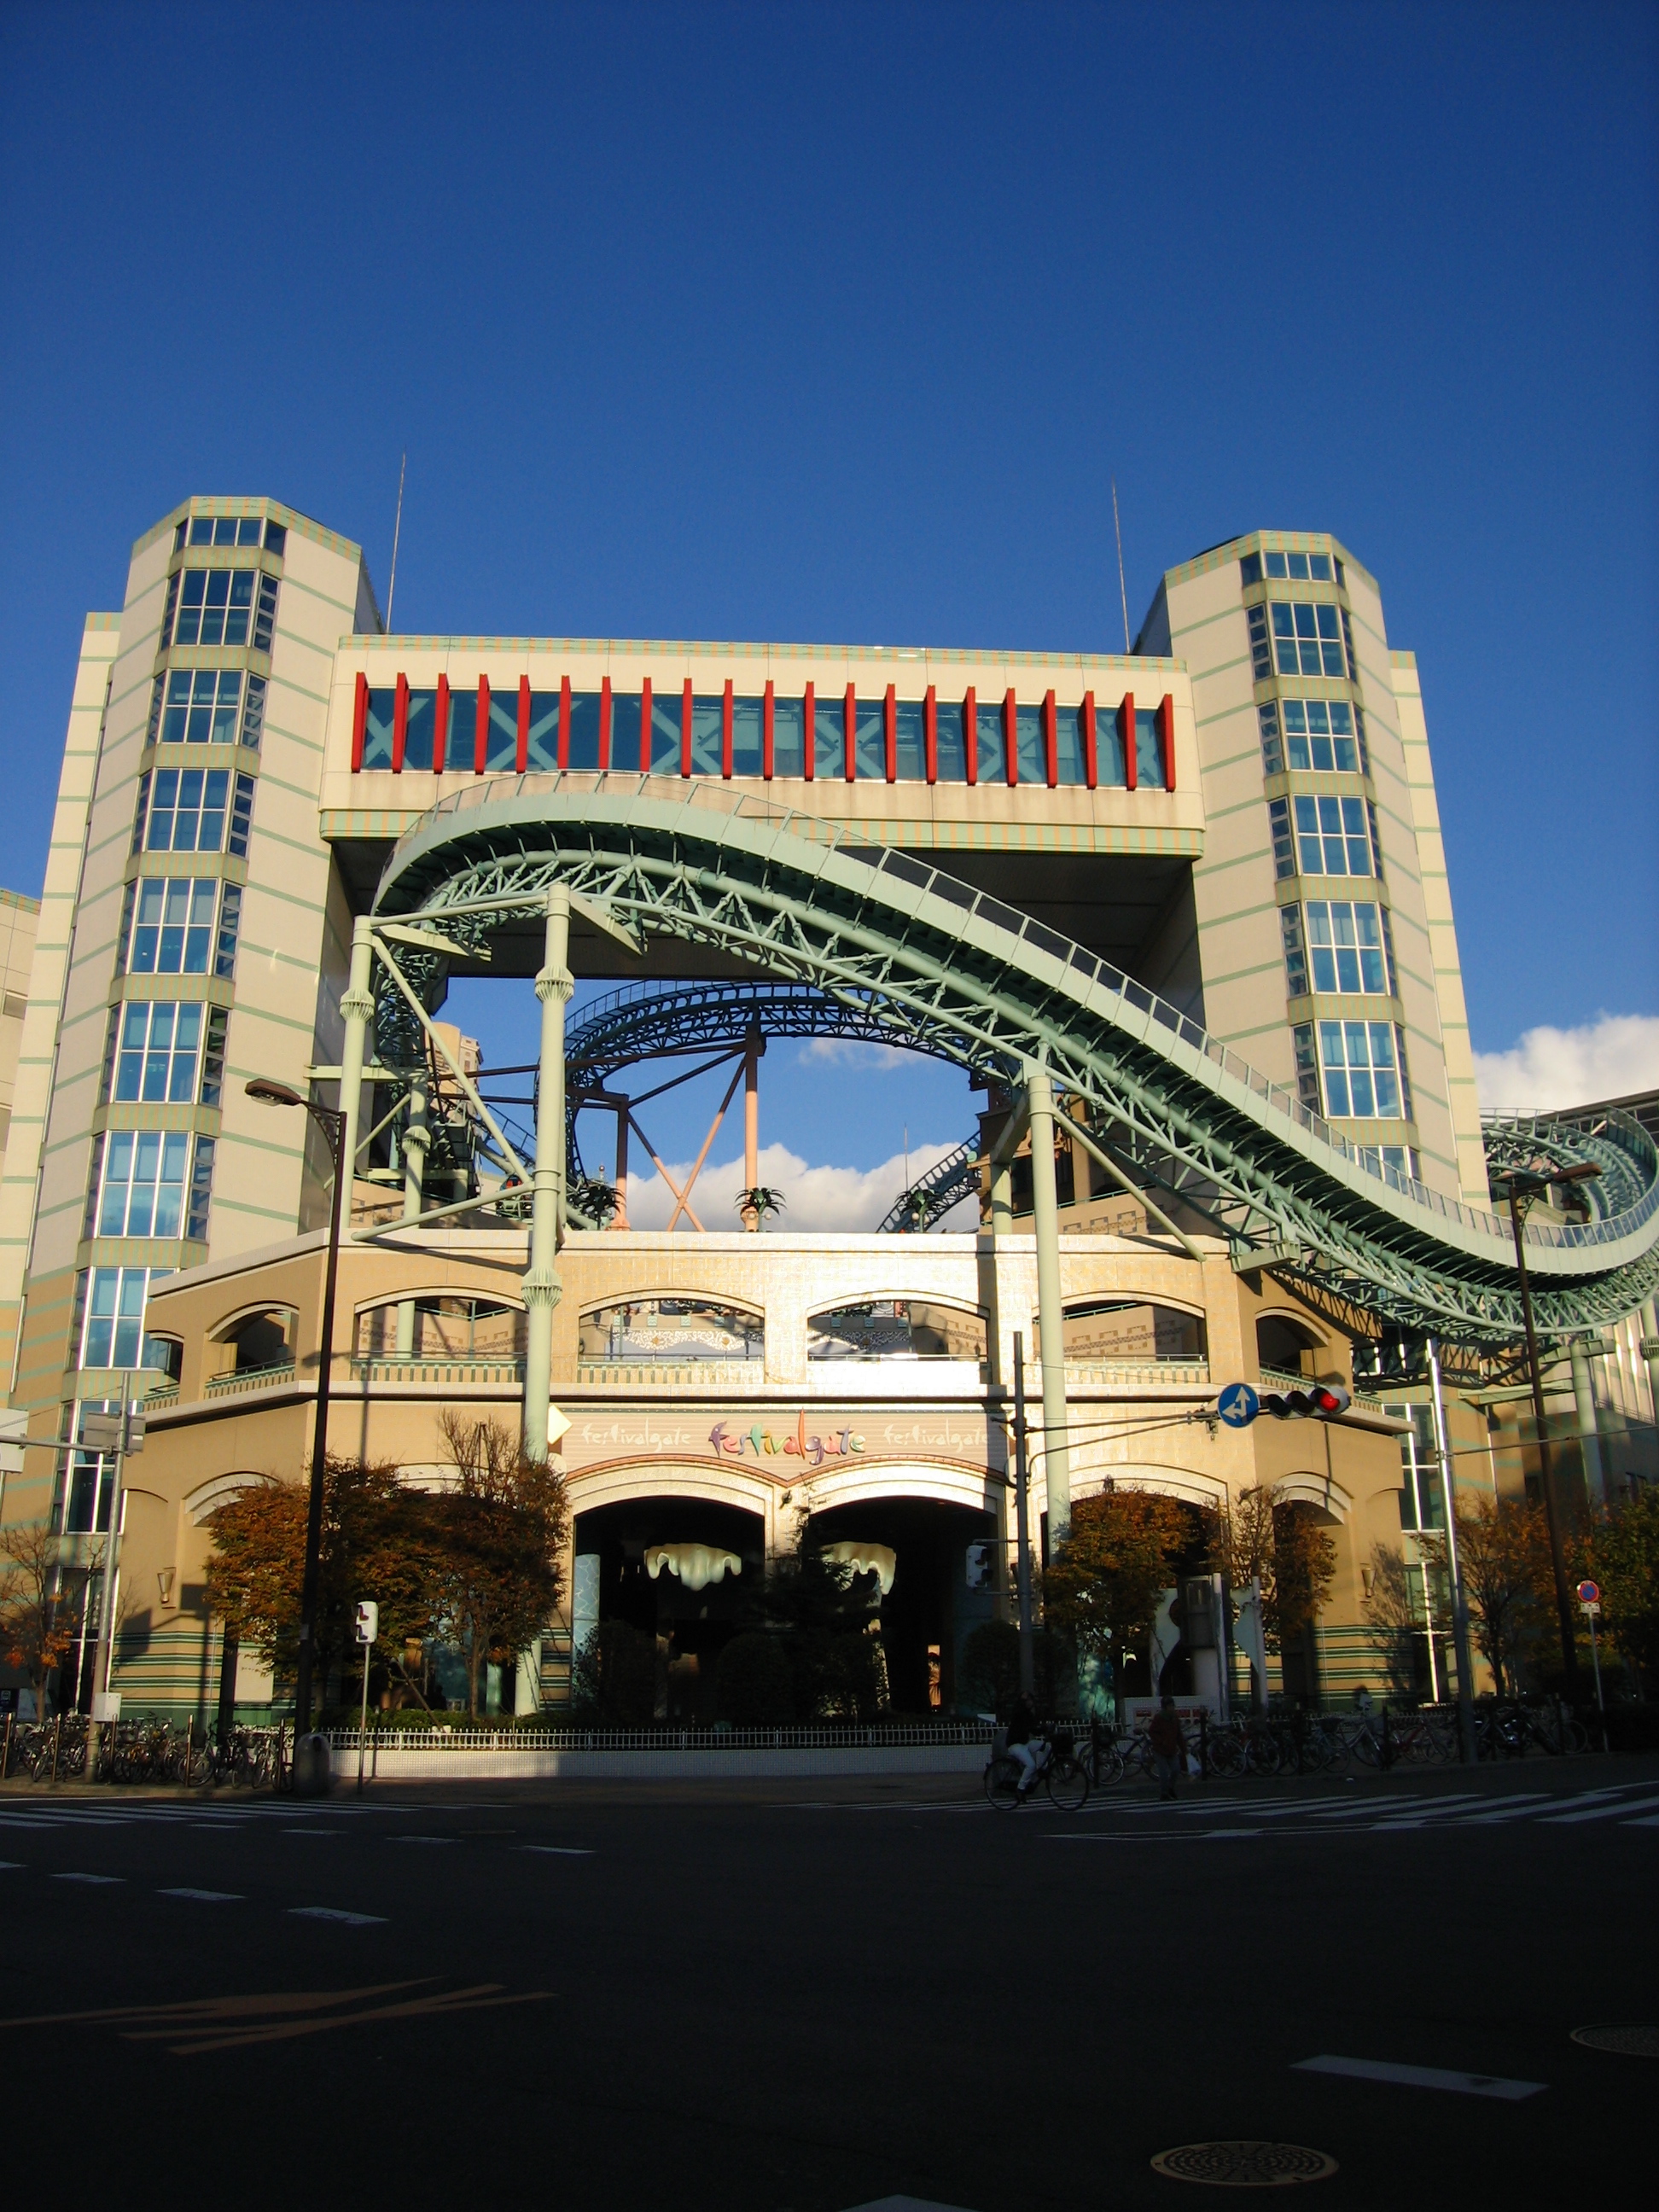 [Figure 3: The Shinsekai Festivalgate amusement park where we started the Cocoroom in 2003. (The park has since been demolished.)]